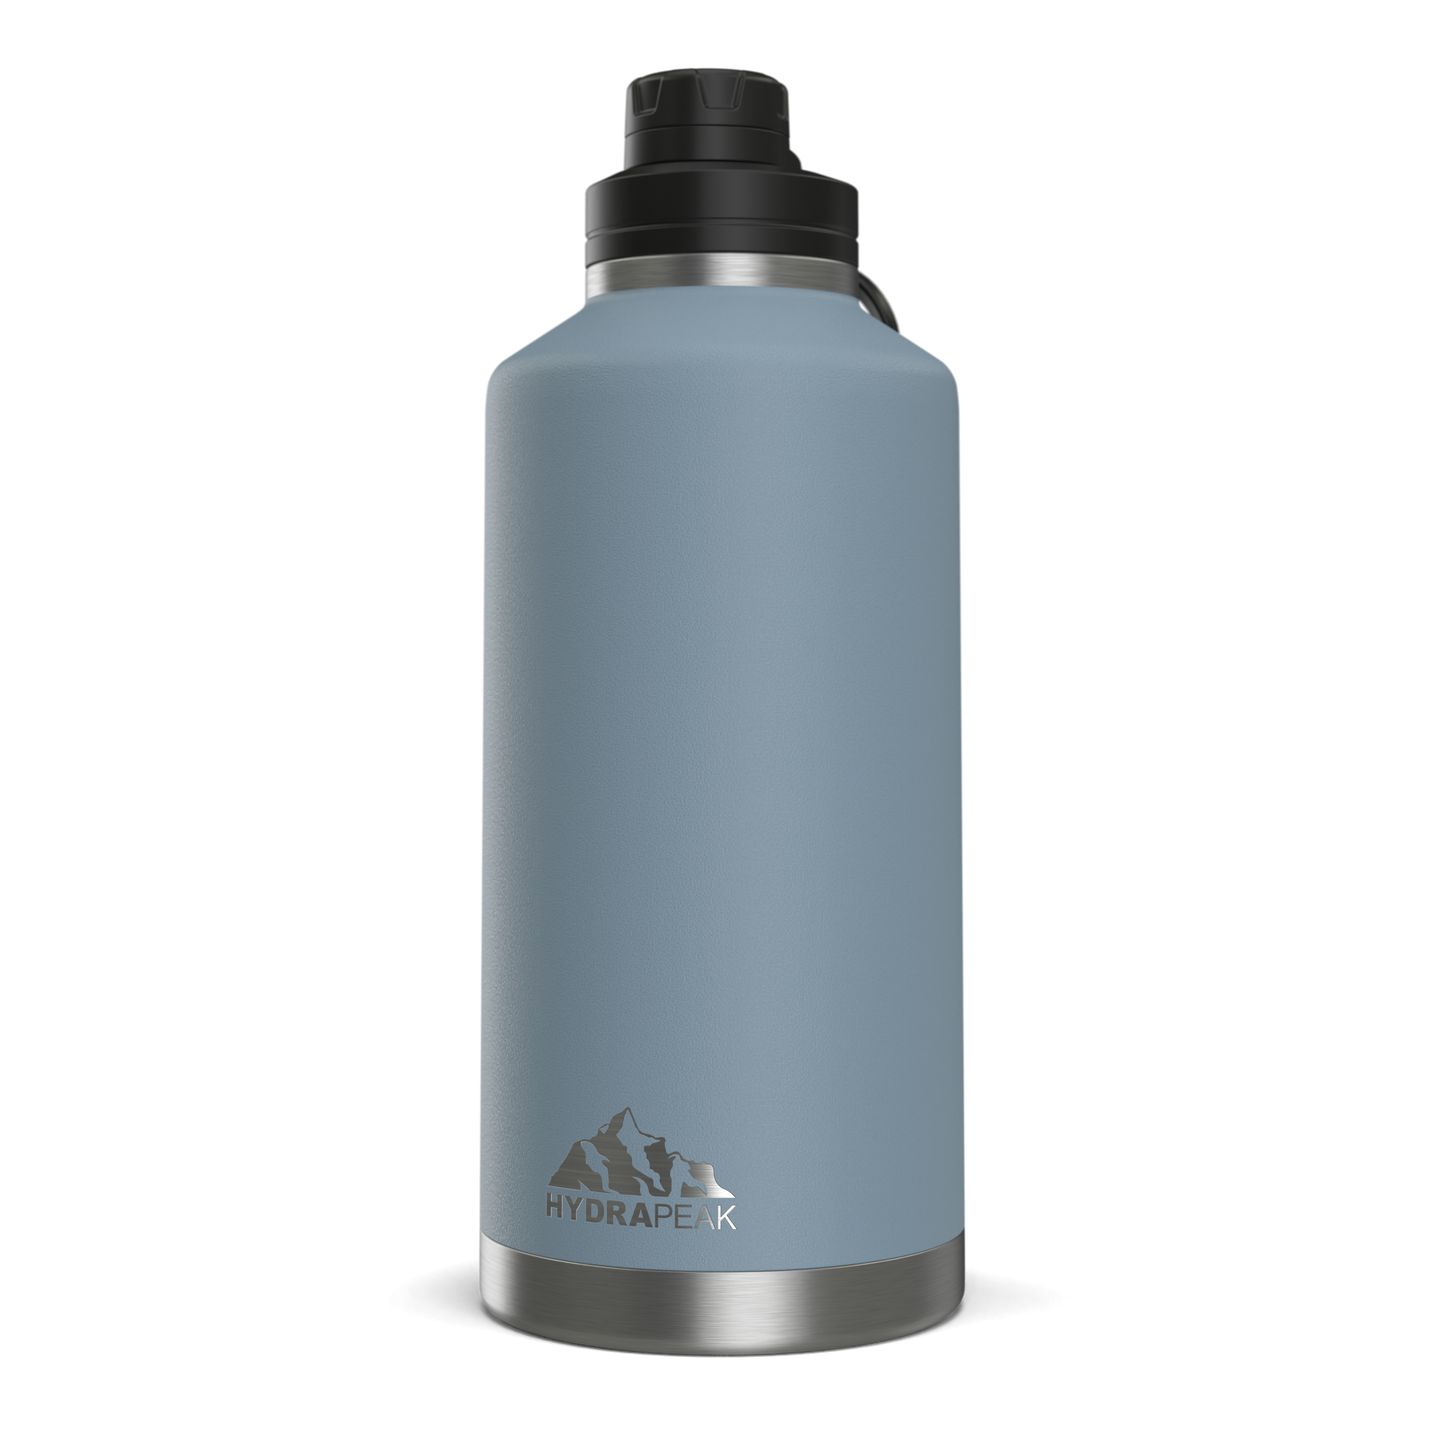 72oz Stainless Steel Insulated Water Bottle With Flexible Chug Lid- Storm